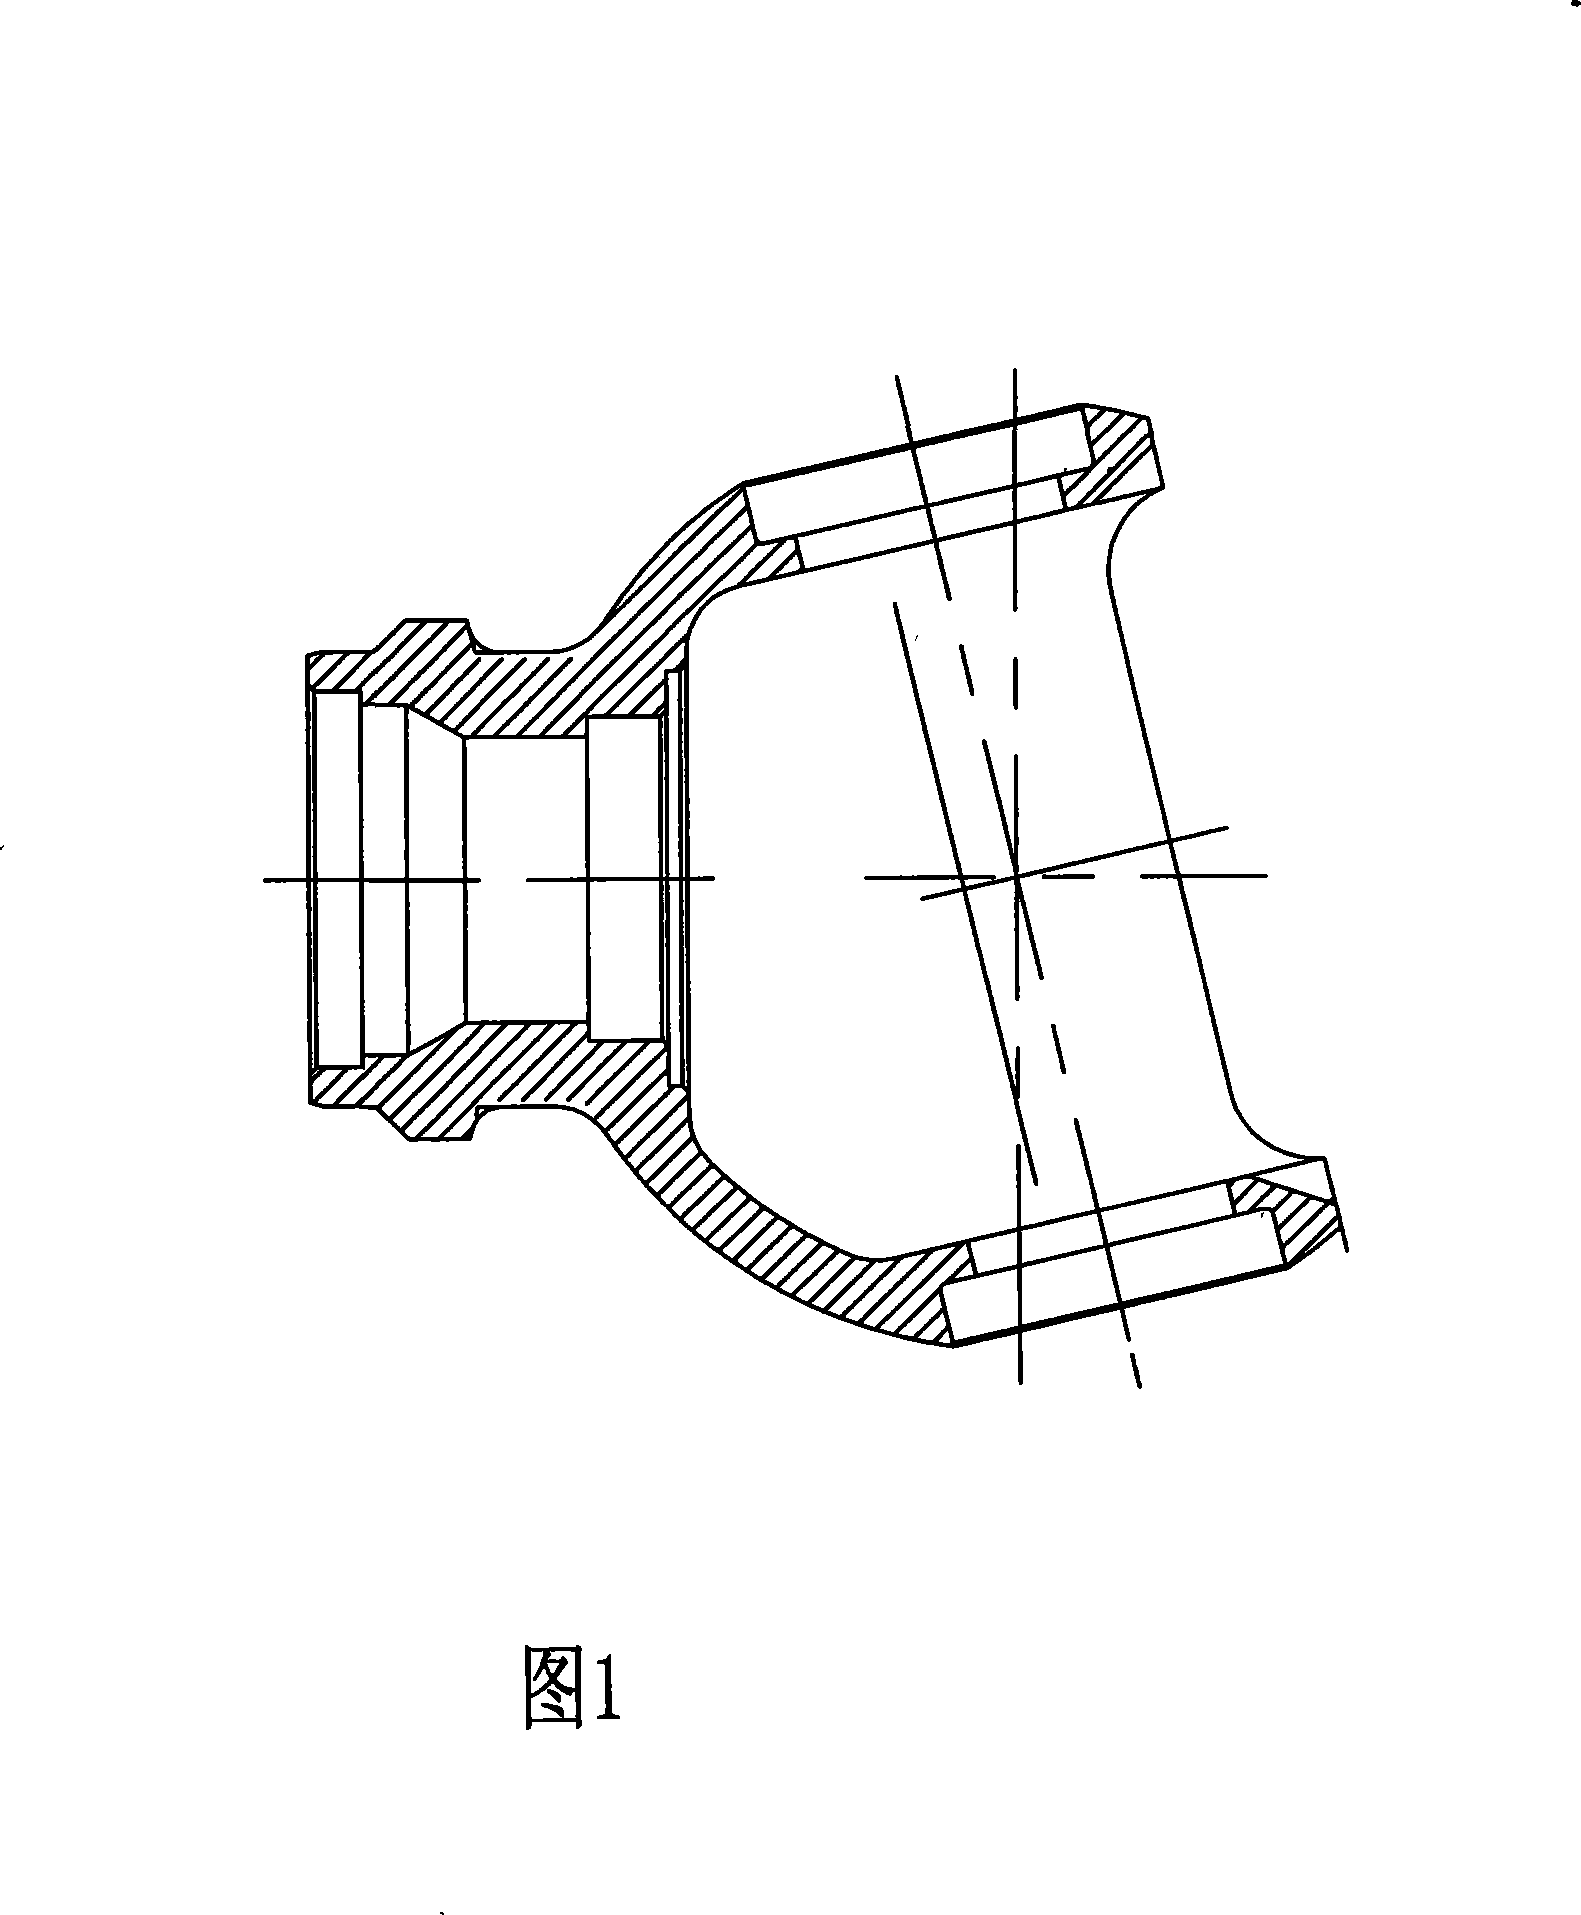 Welding clamp and welding process for axle housing assembly